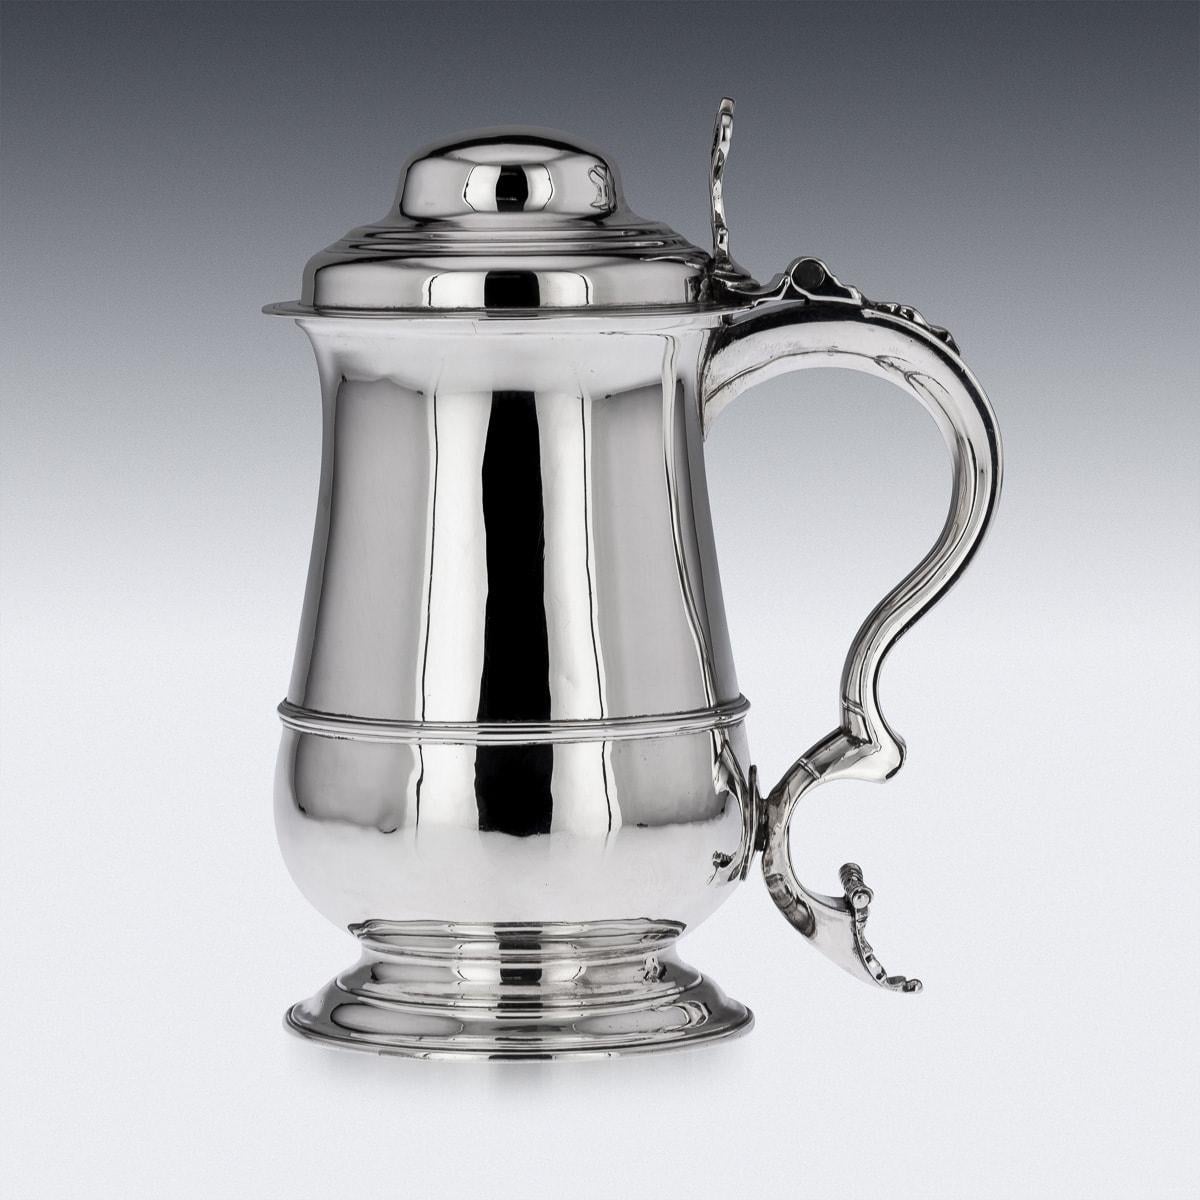 Antique 18th Century Georgian solid silver lidded tankard, the domed lid is applied with a cast thumb-piece, the scrolled handle terminating in a scripture. The tankard features a bellied body on a flared foot, the sides smooth with a reeded band